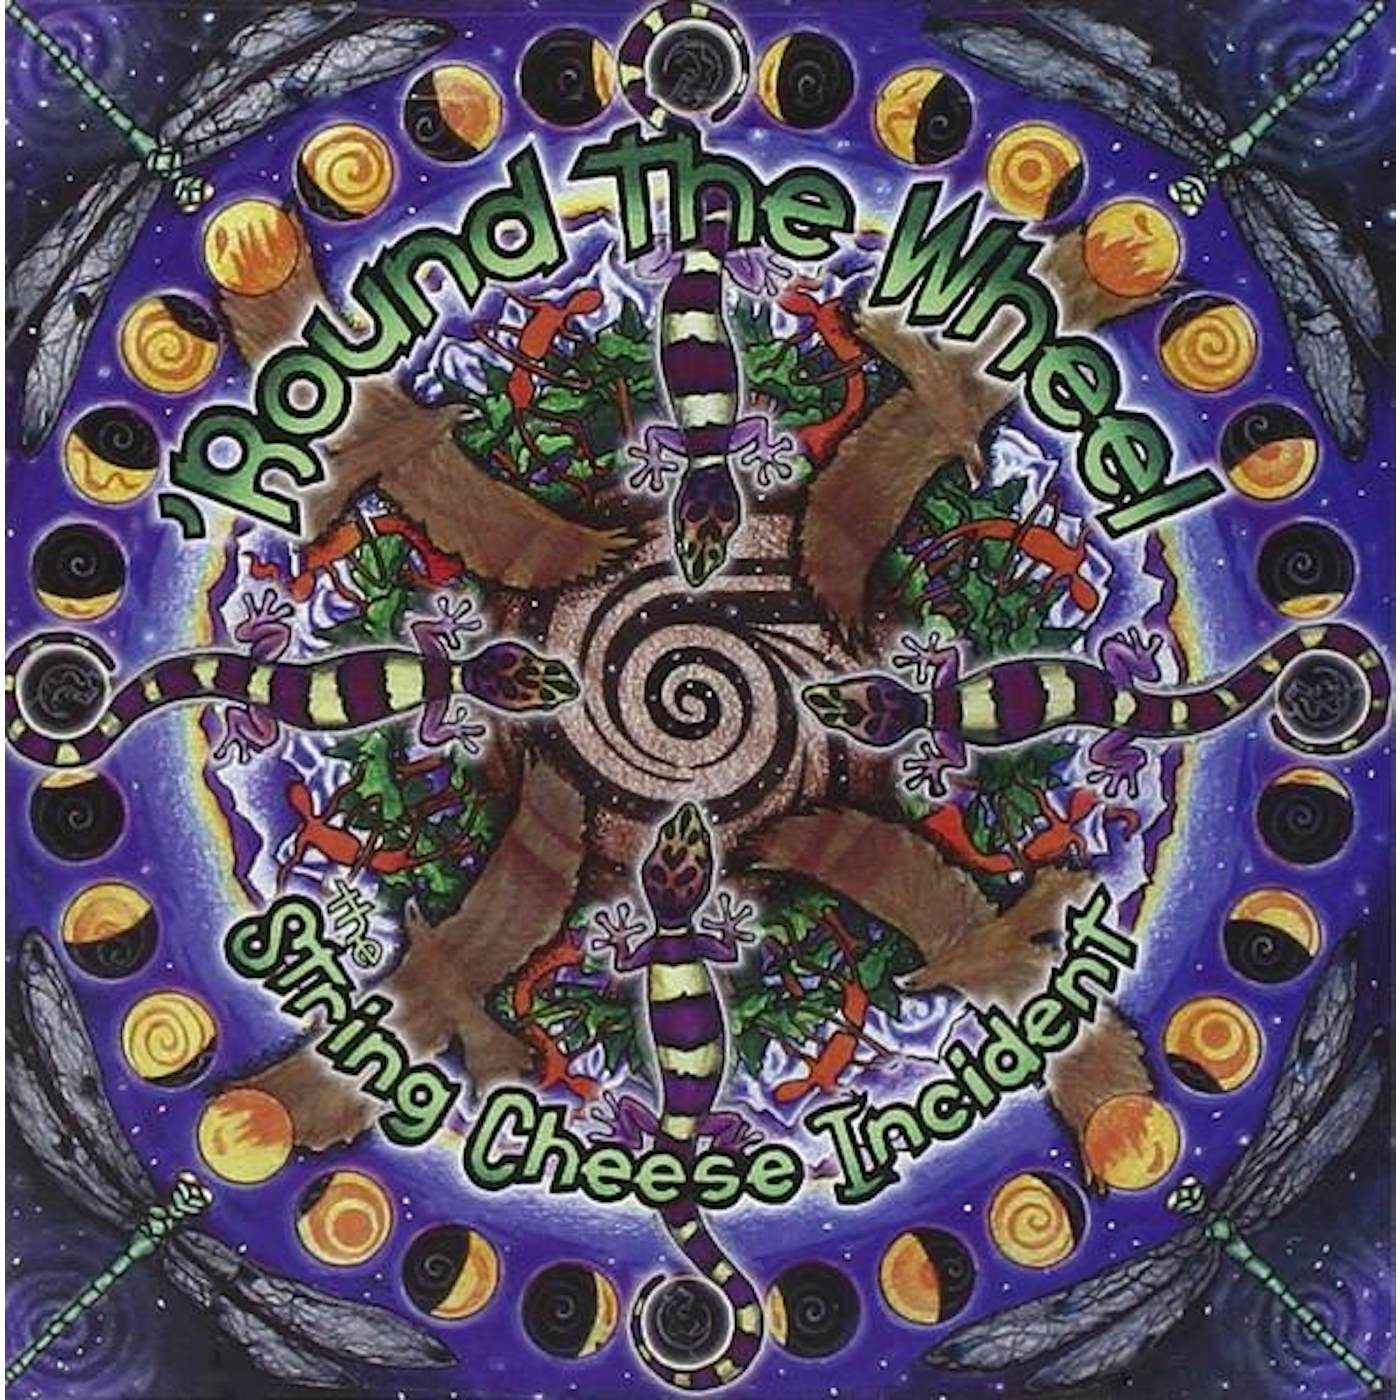 The String Cheese Incident ROUND THE WHEEL (2LP/180G) Vinyl Record